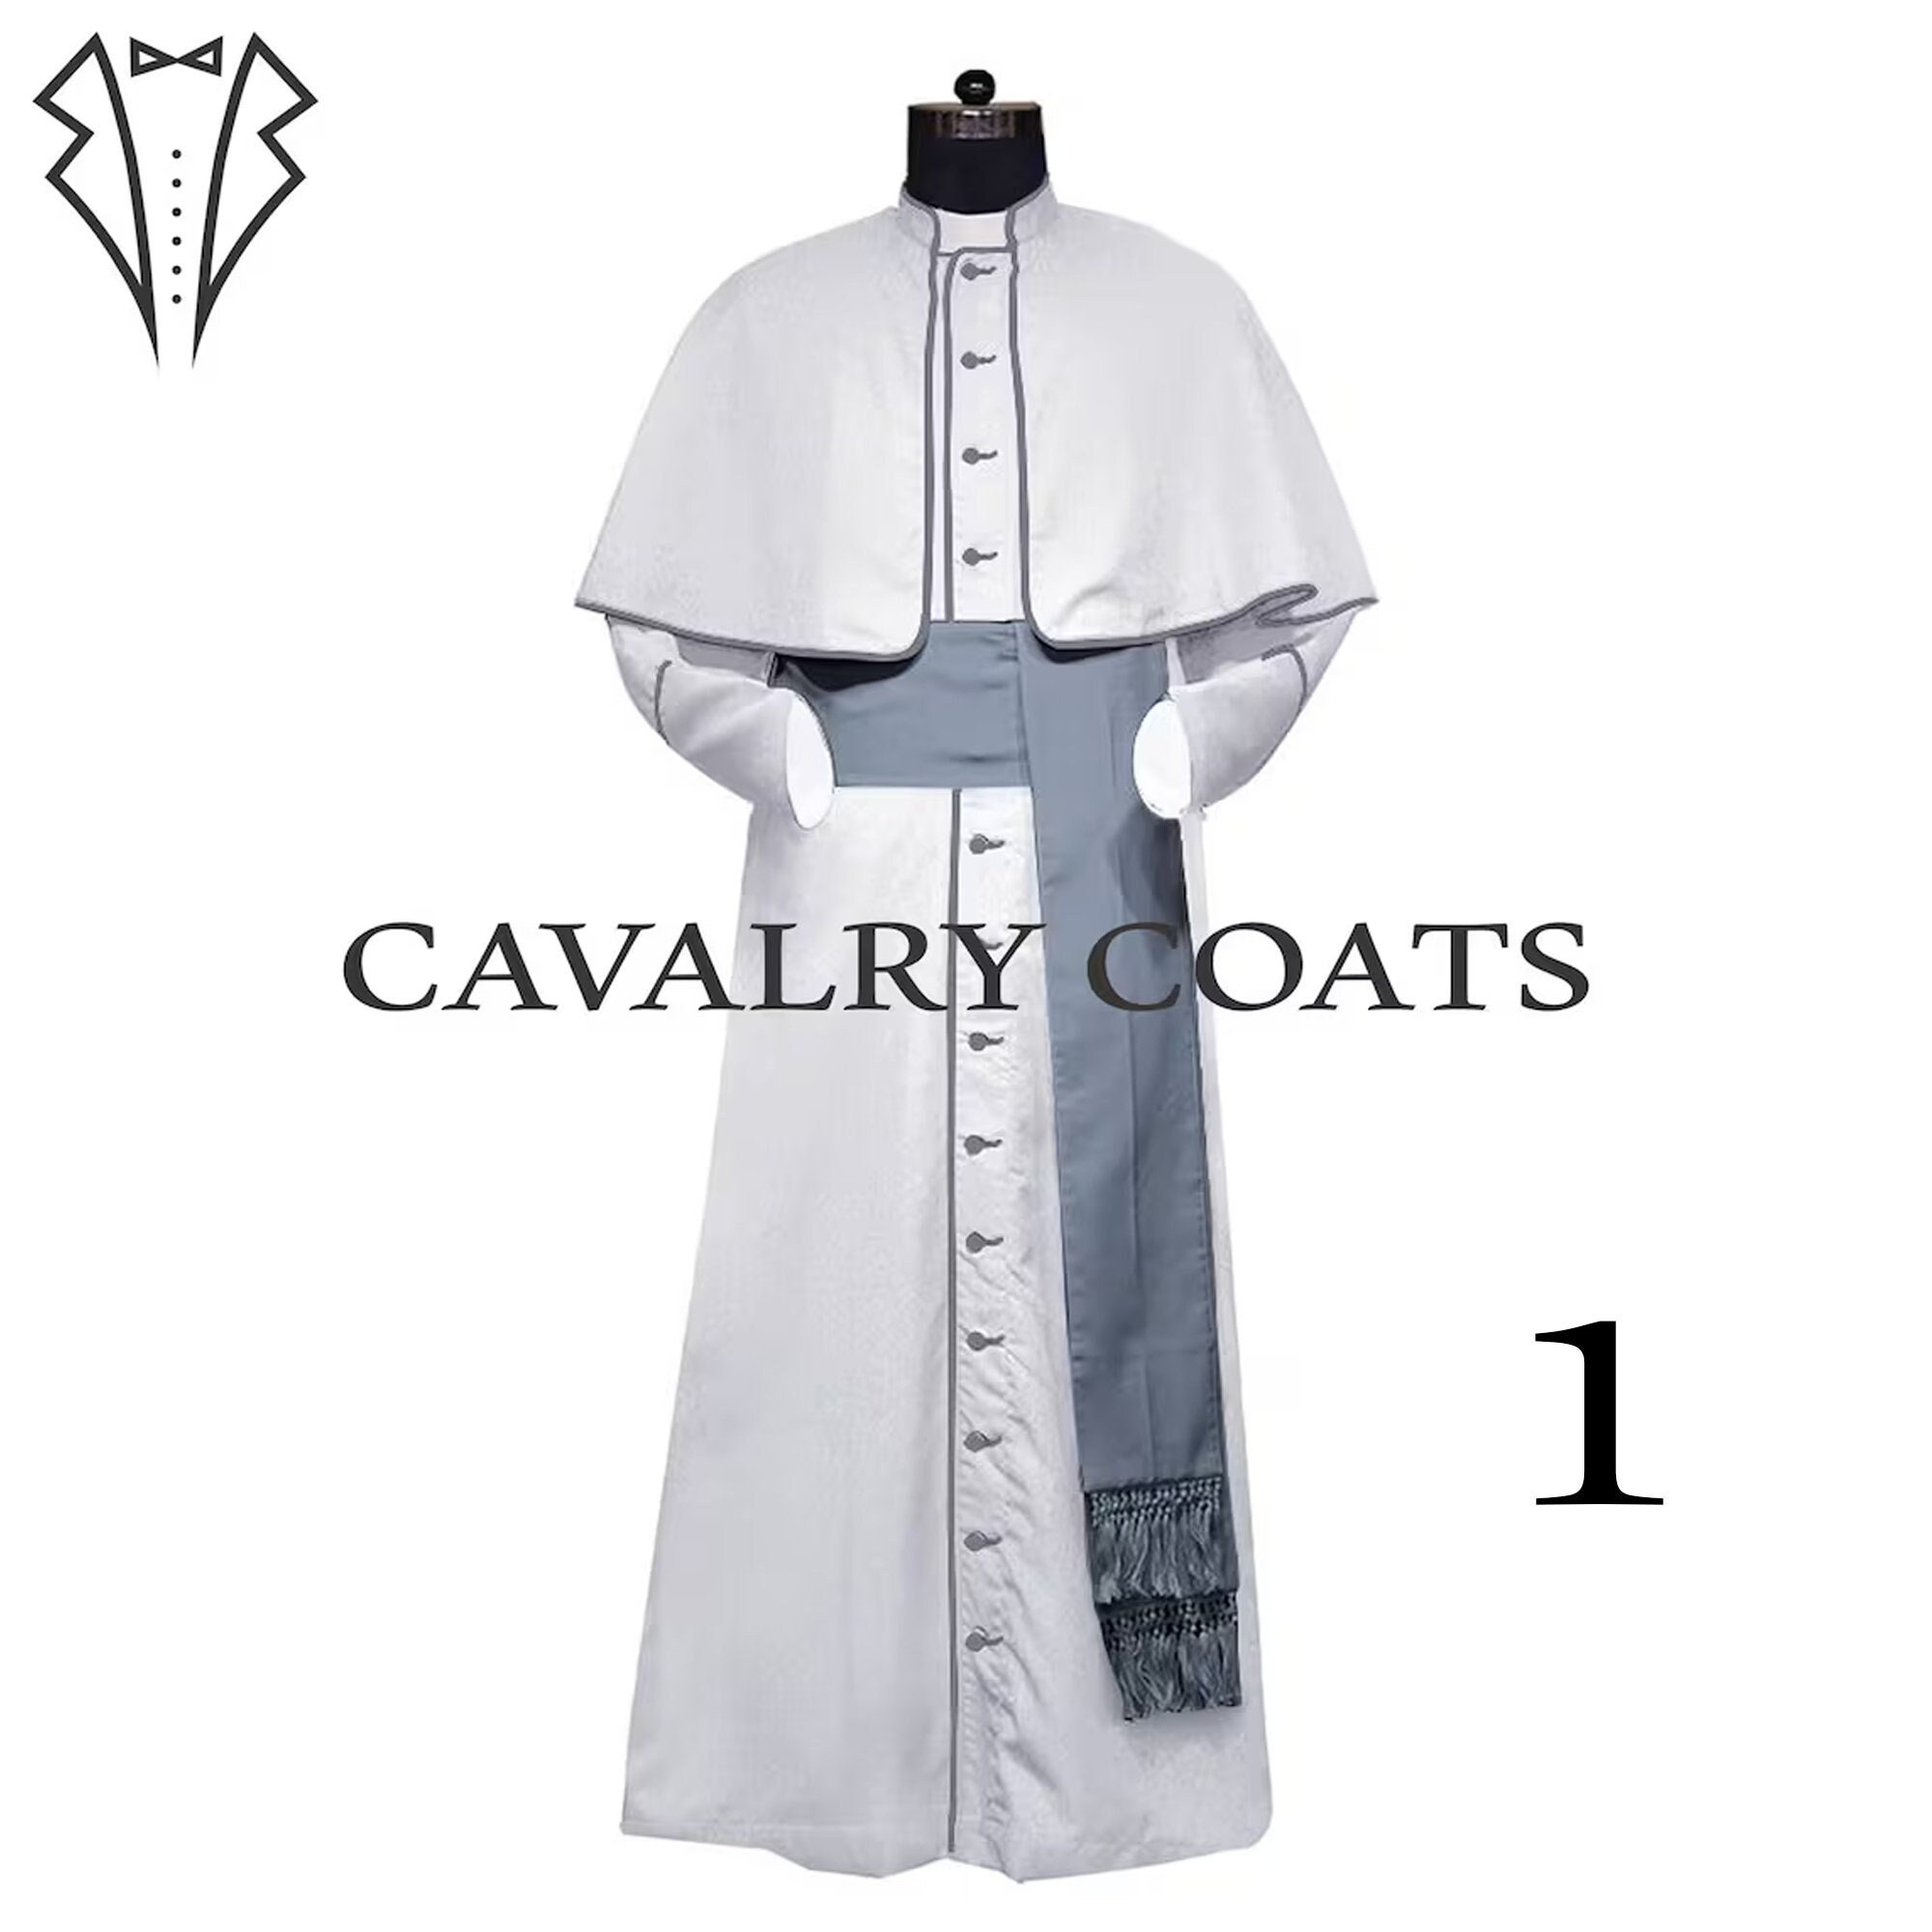 Custom Clergy Robes in Professional Design | Ivyrobes